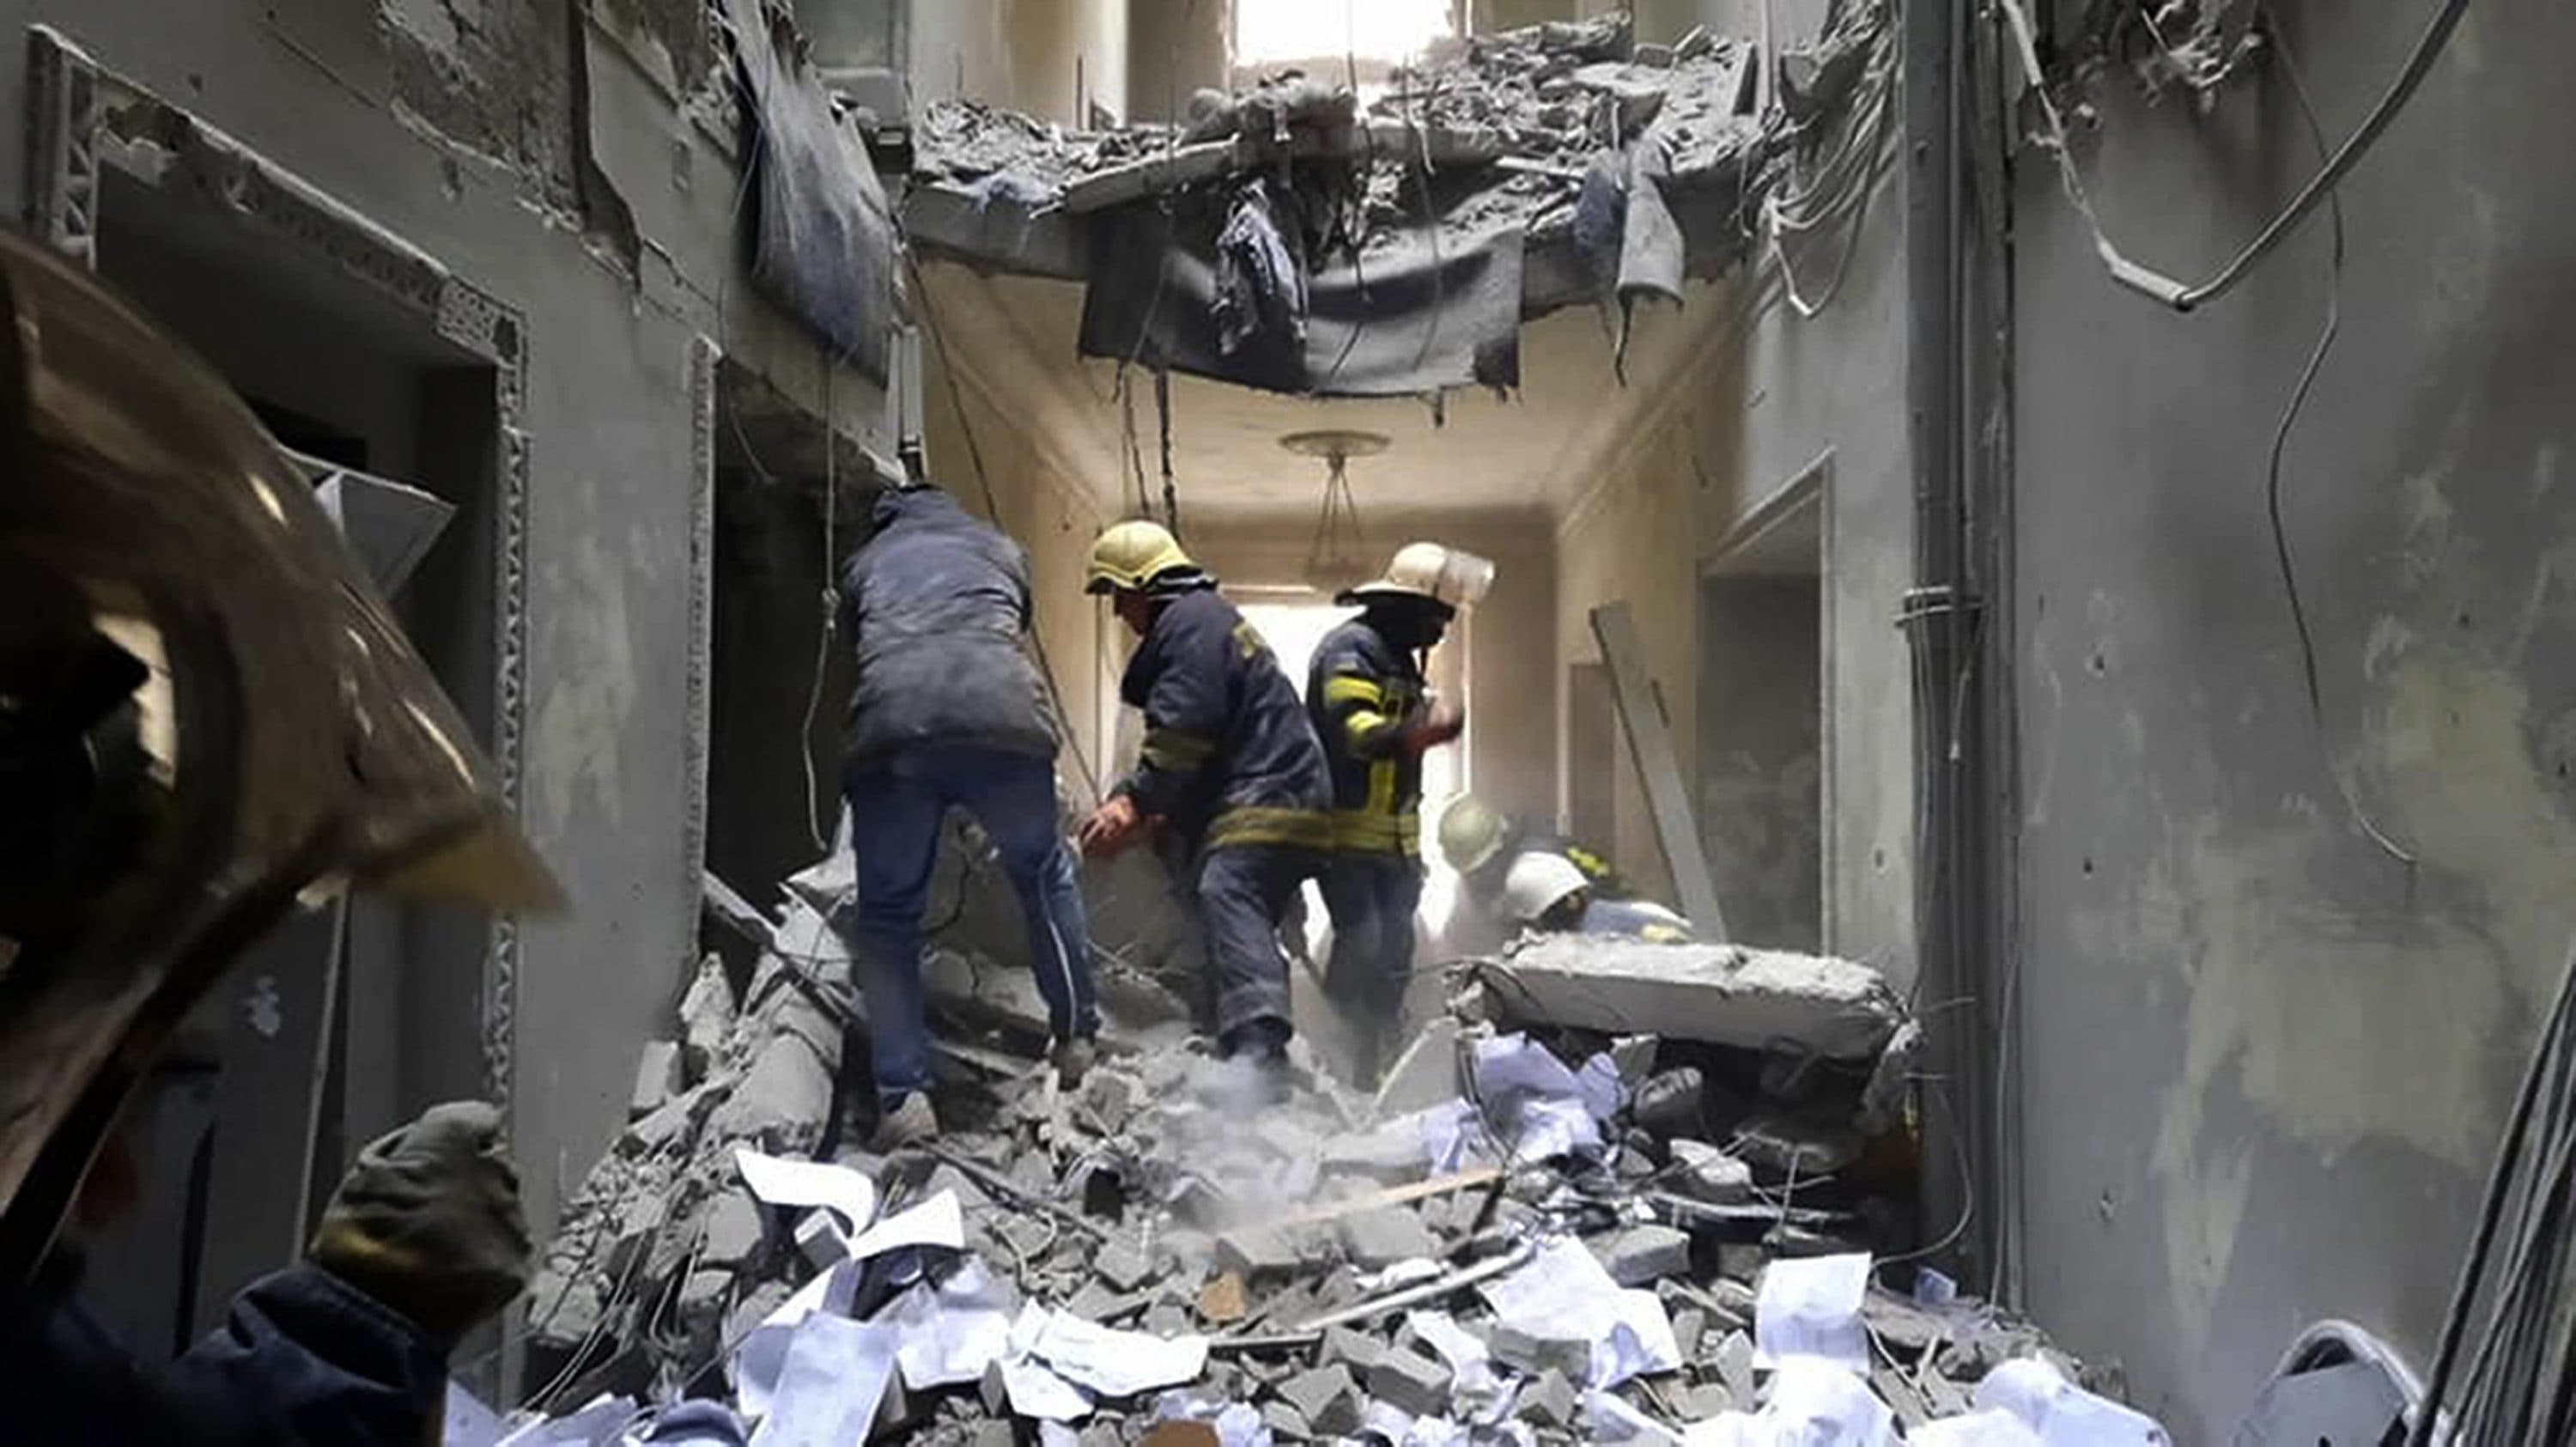 This handout photo released by Ukrainian Emergency Service shows emergency service personnel inspecting the damage inside the City Hall building in Kharkiv, Ukraine on March 1. (Ukrainian Emergency Service via AP)